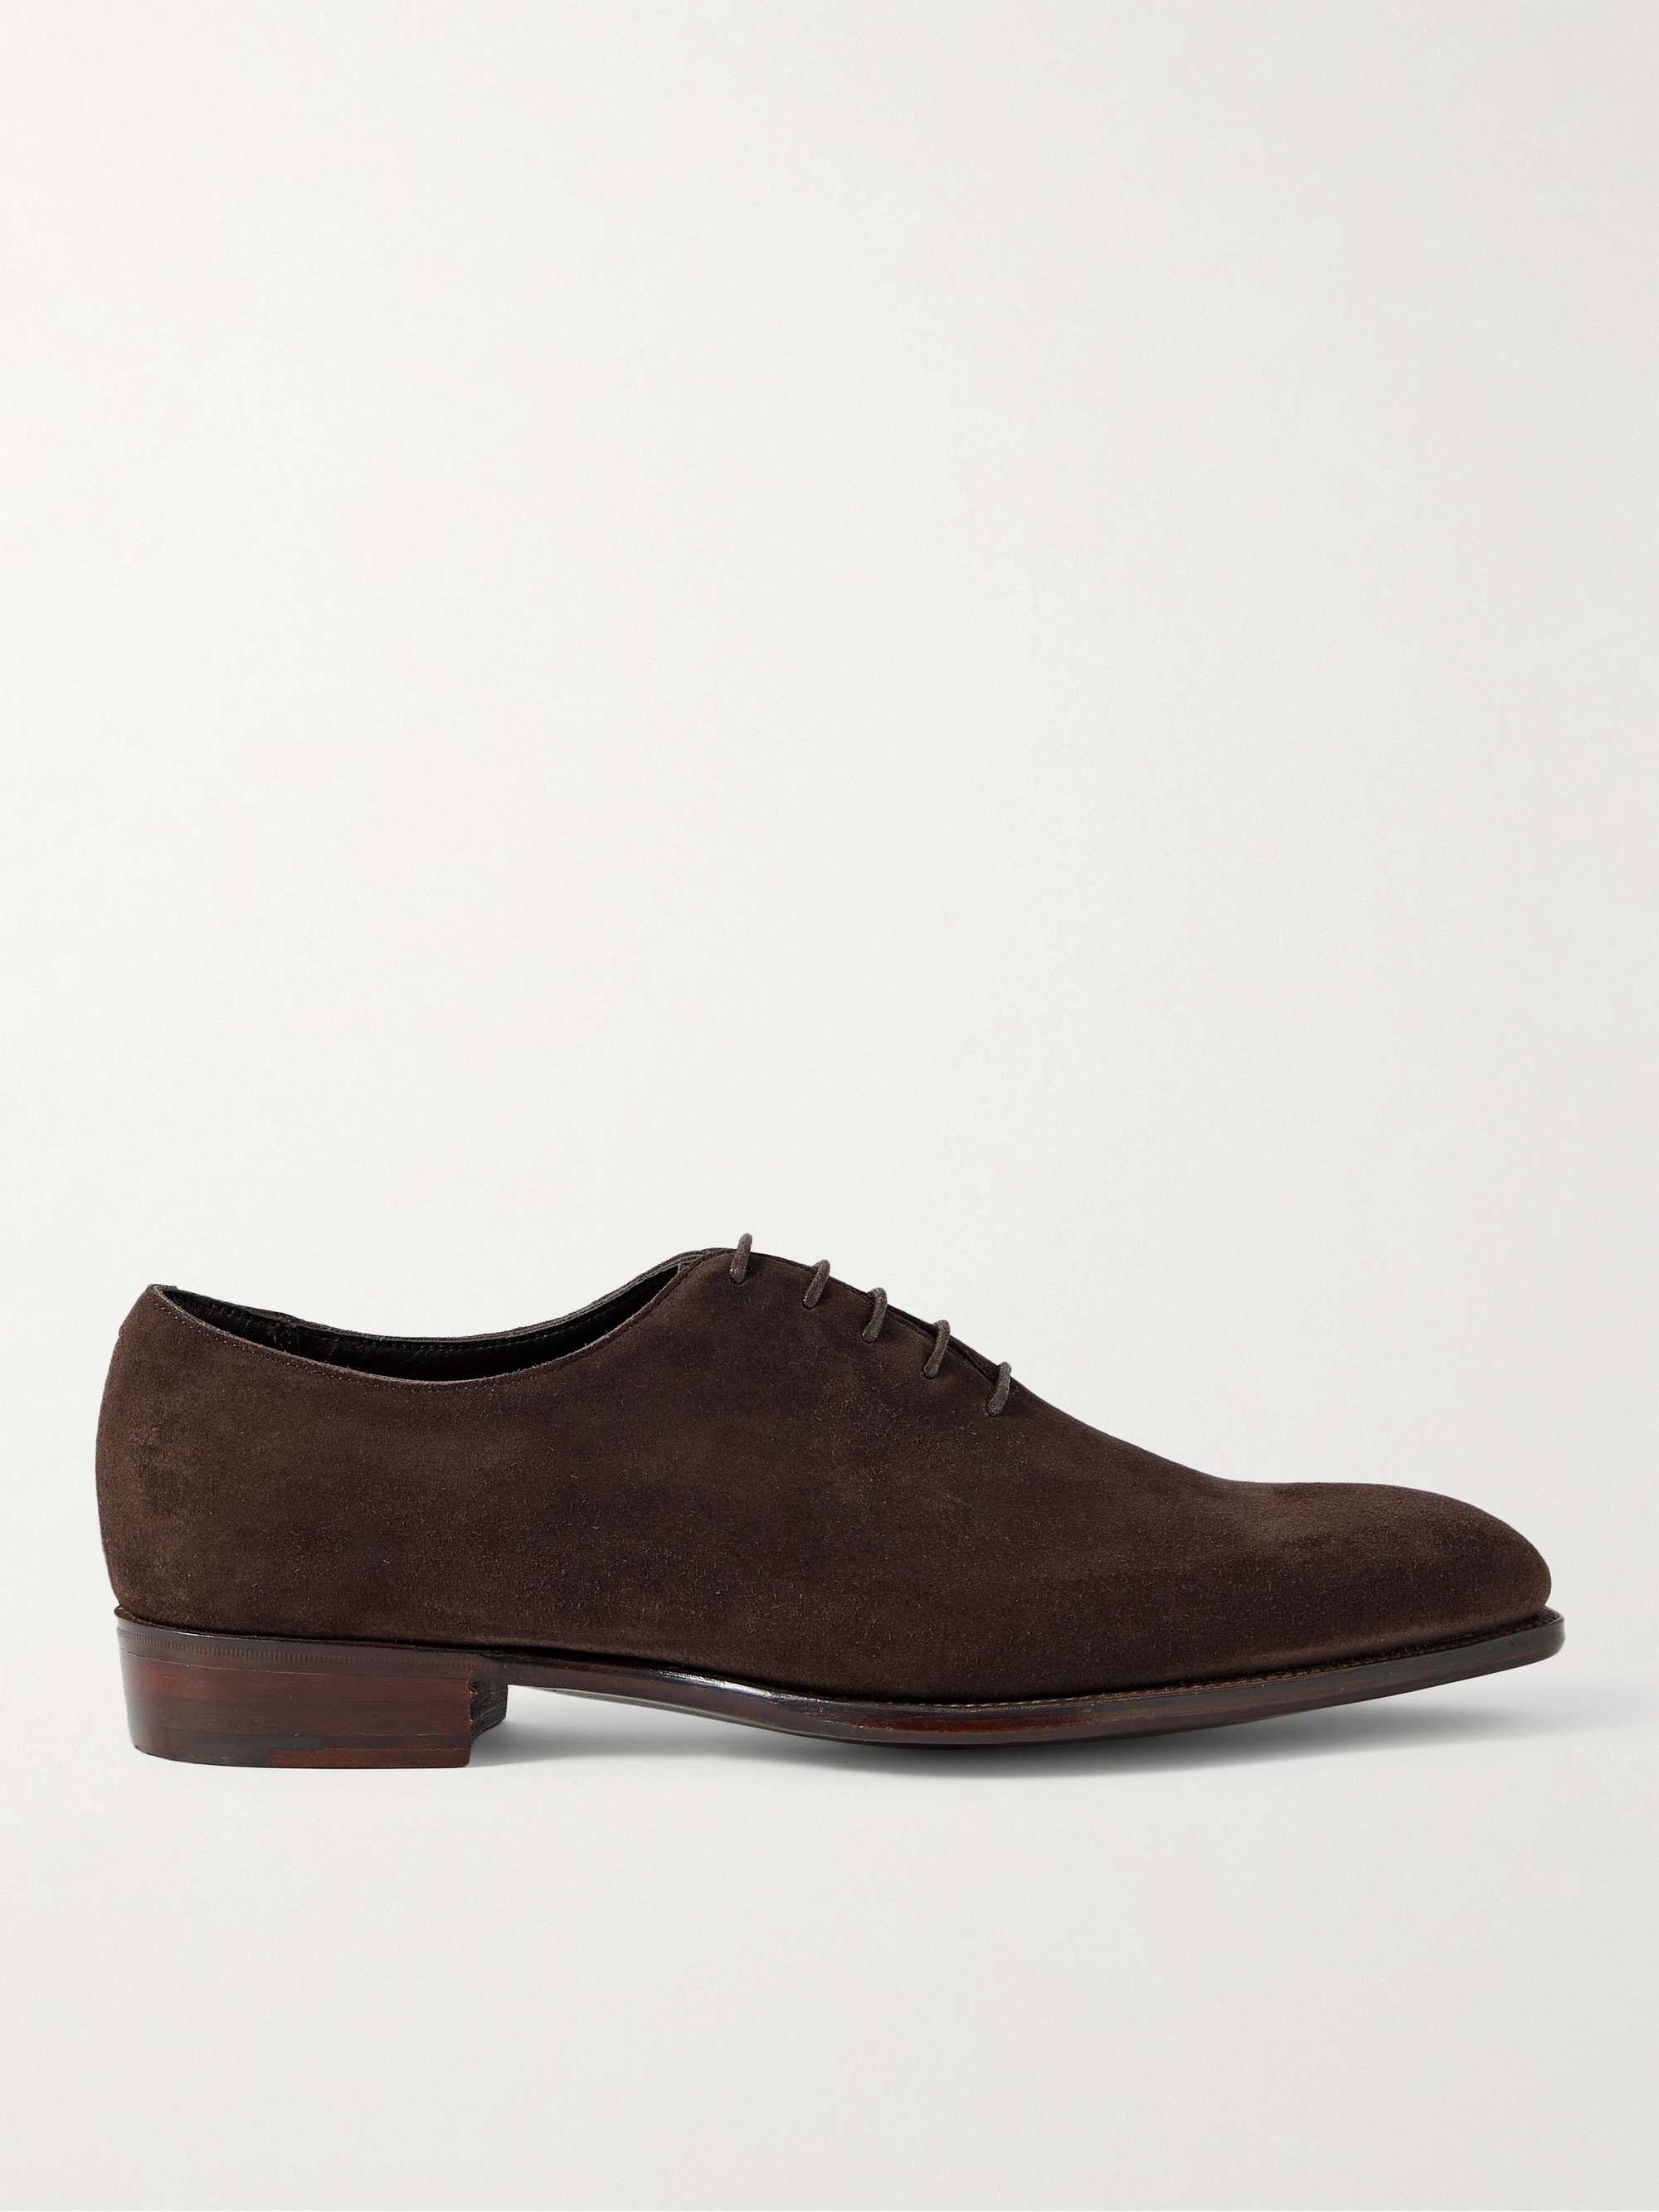 Kingsman Men's George Cleverley Oxford Shoes